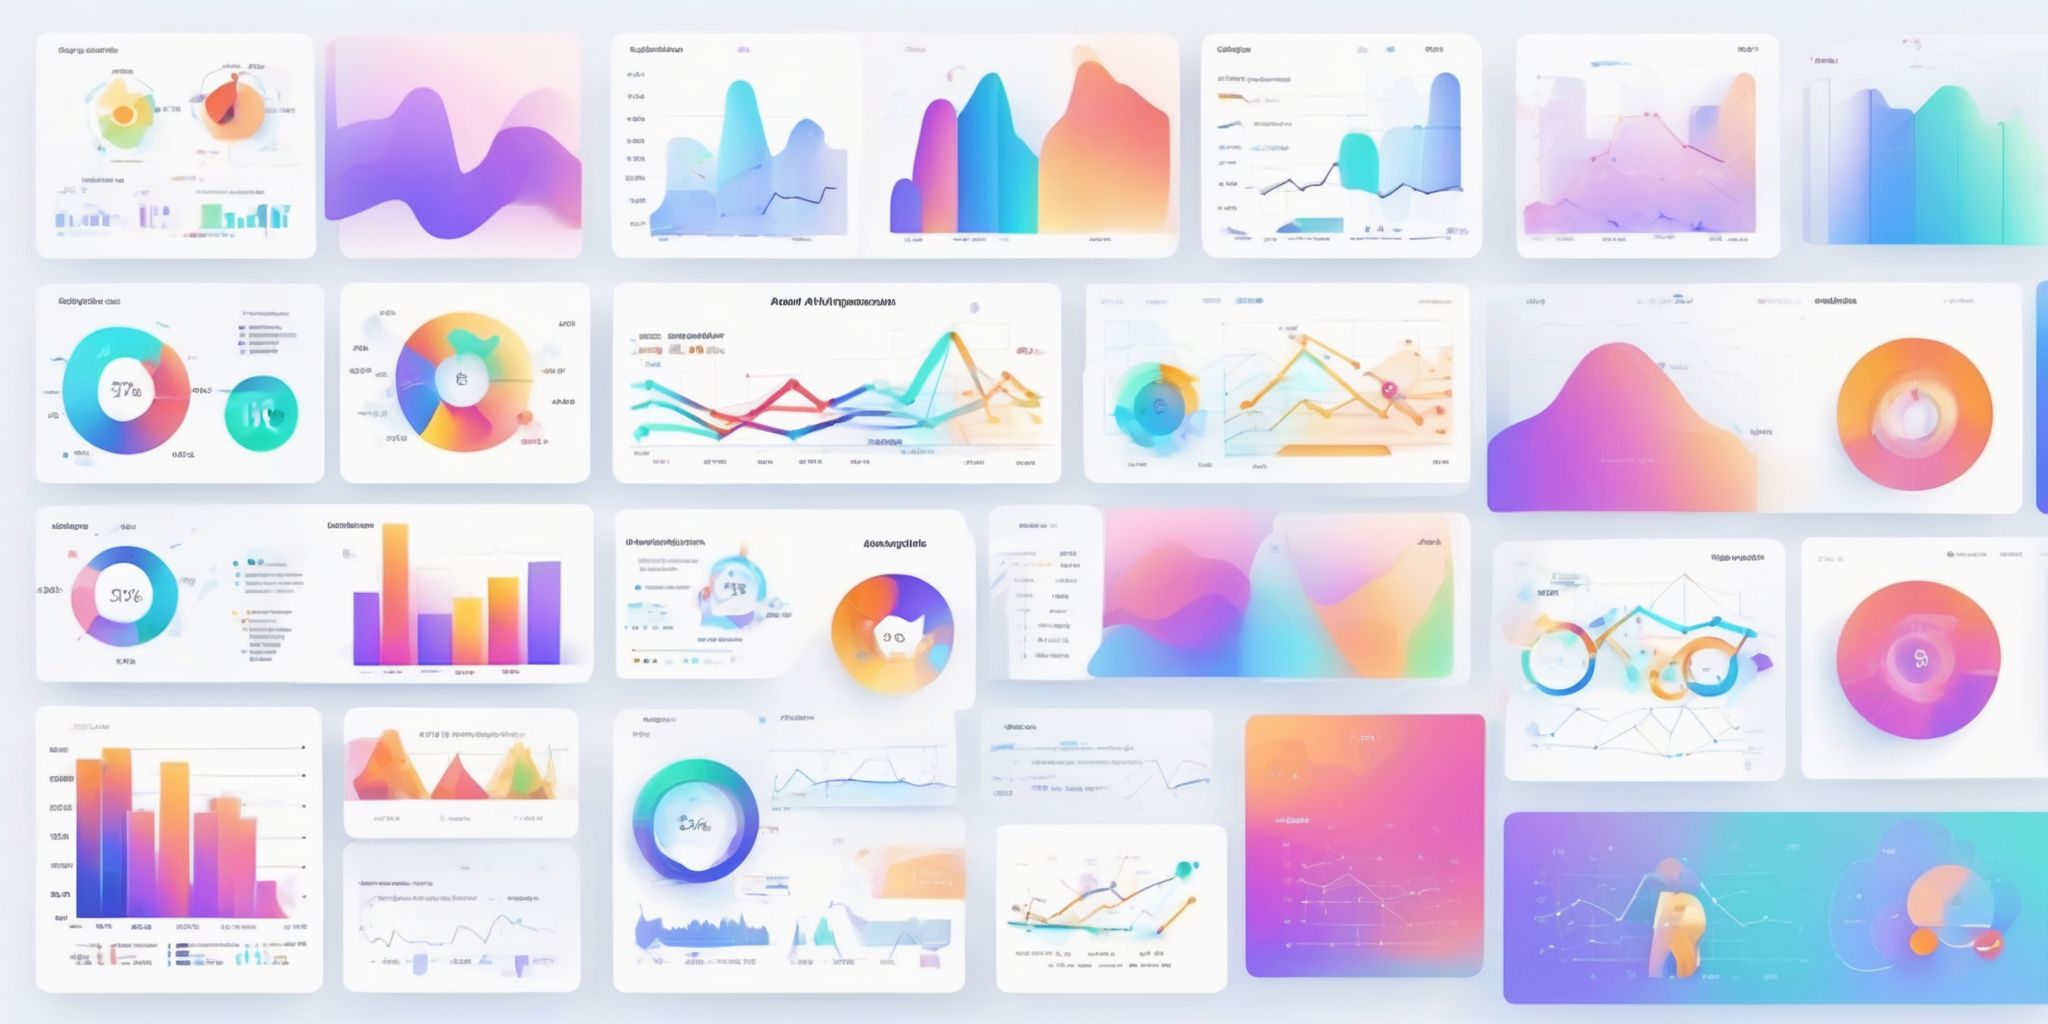 Analytics in illustration style with gradients and white background